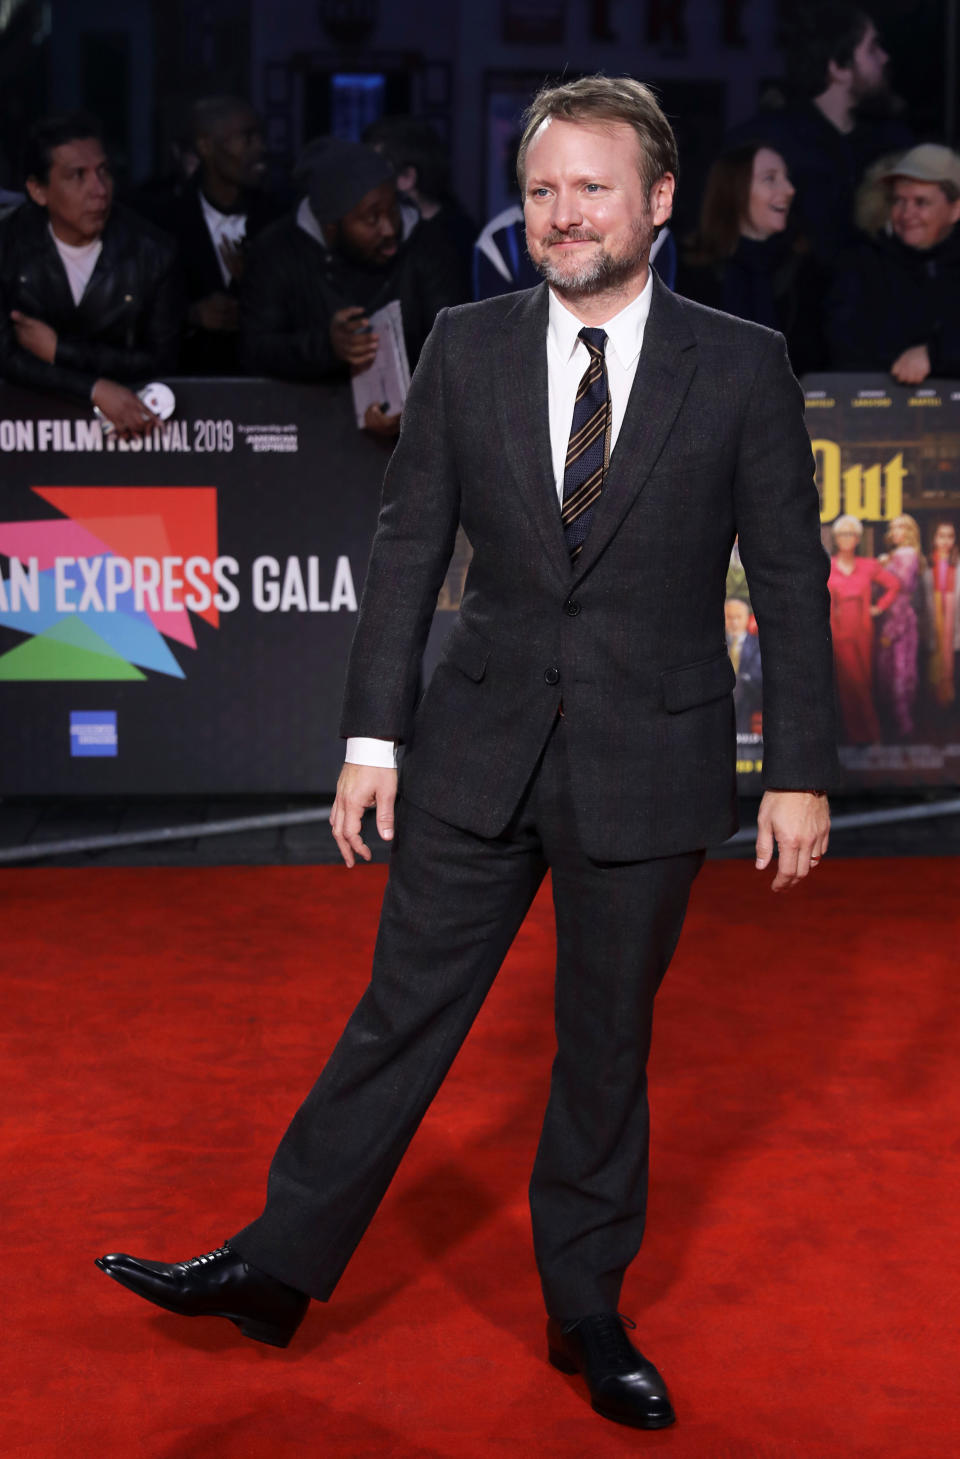 FILE PHOTO: Director Rian Johnson attends the European premiere of "Knives Out" in London